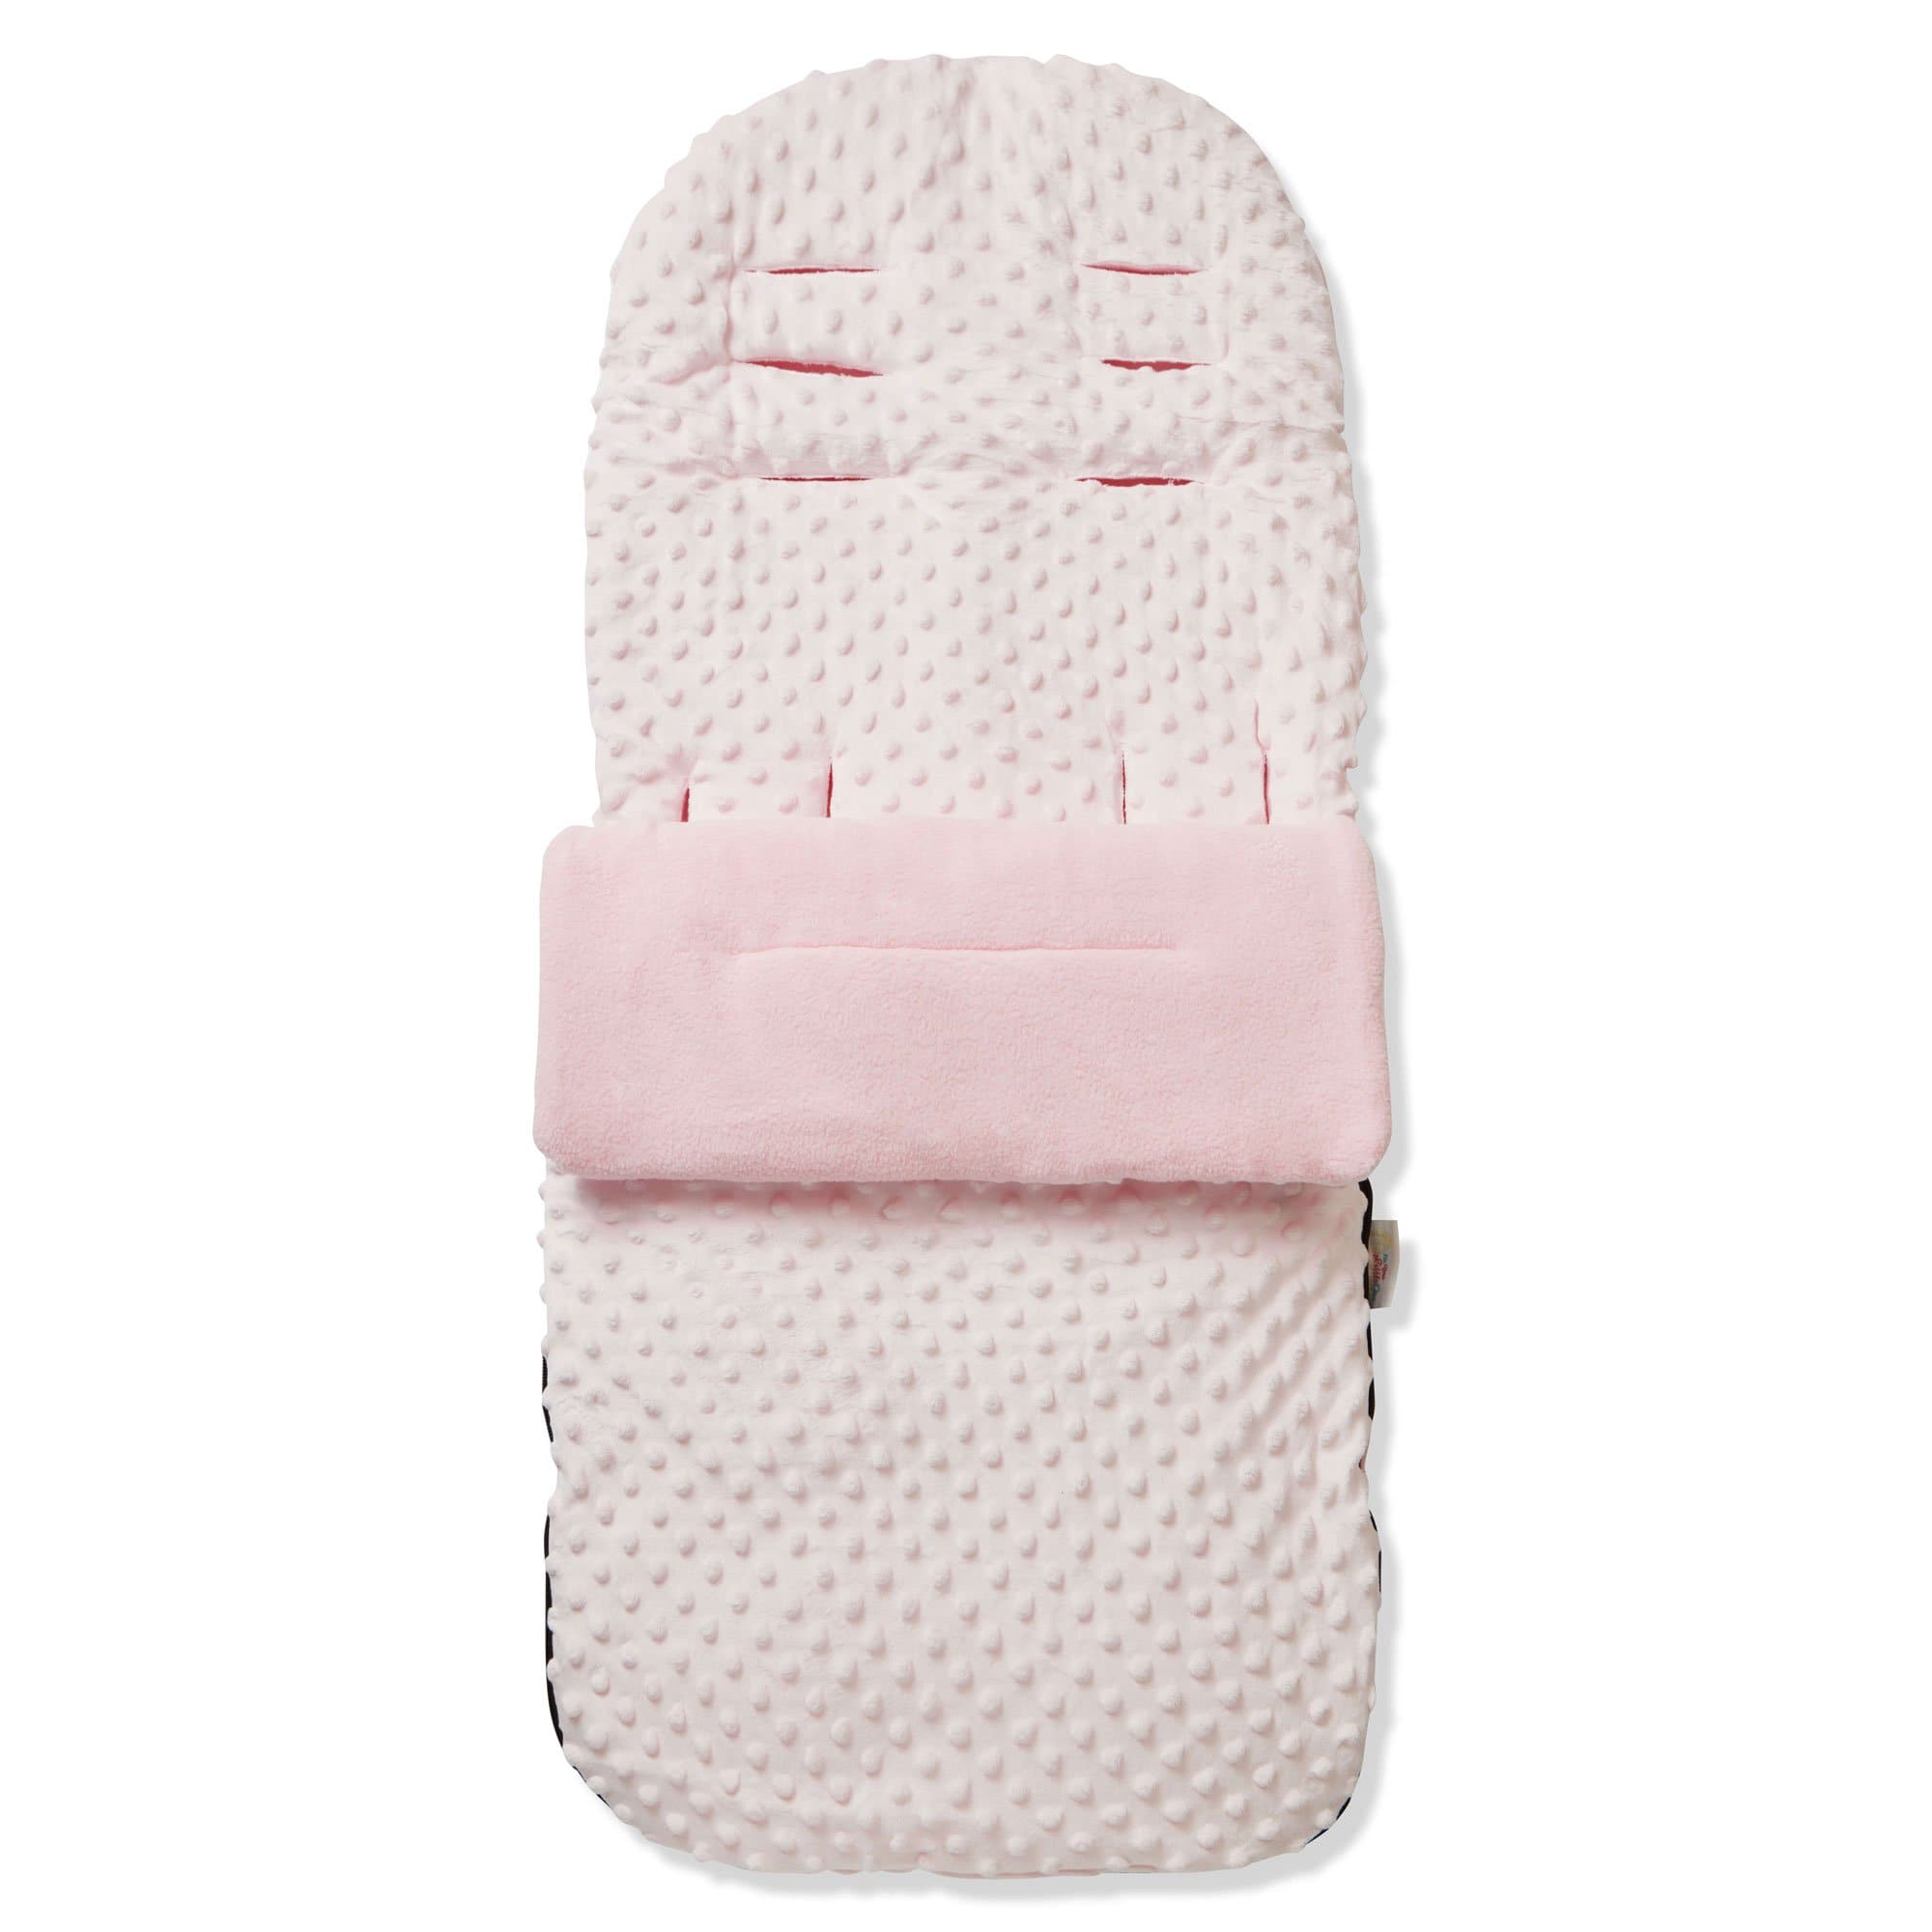 Dimple Footmuff / Cosy Toes Compatible with Mamas & Papas - Pink / Fits All Models | For Your Little One